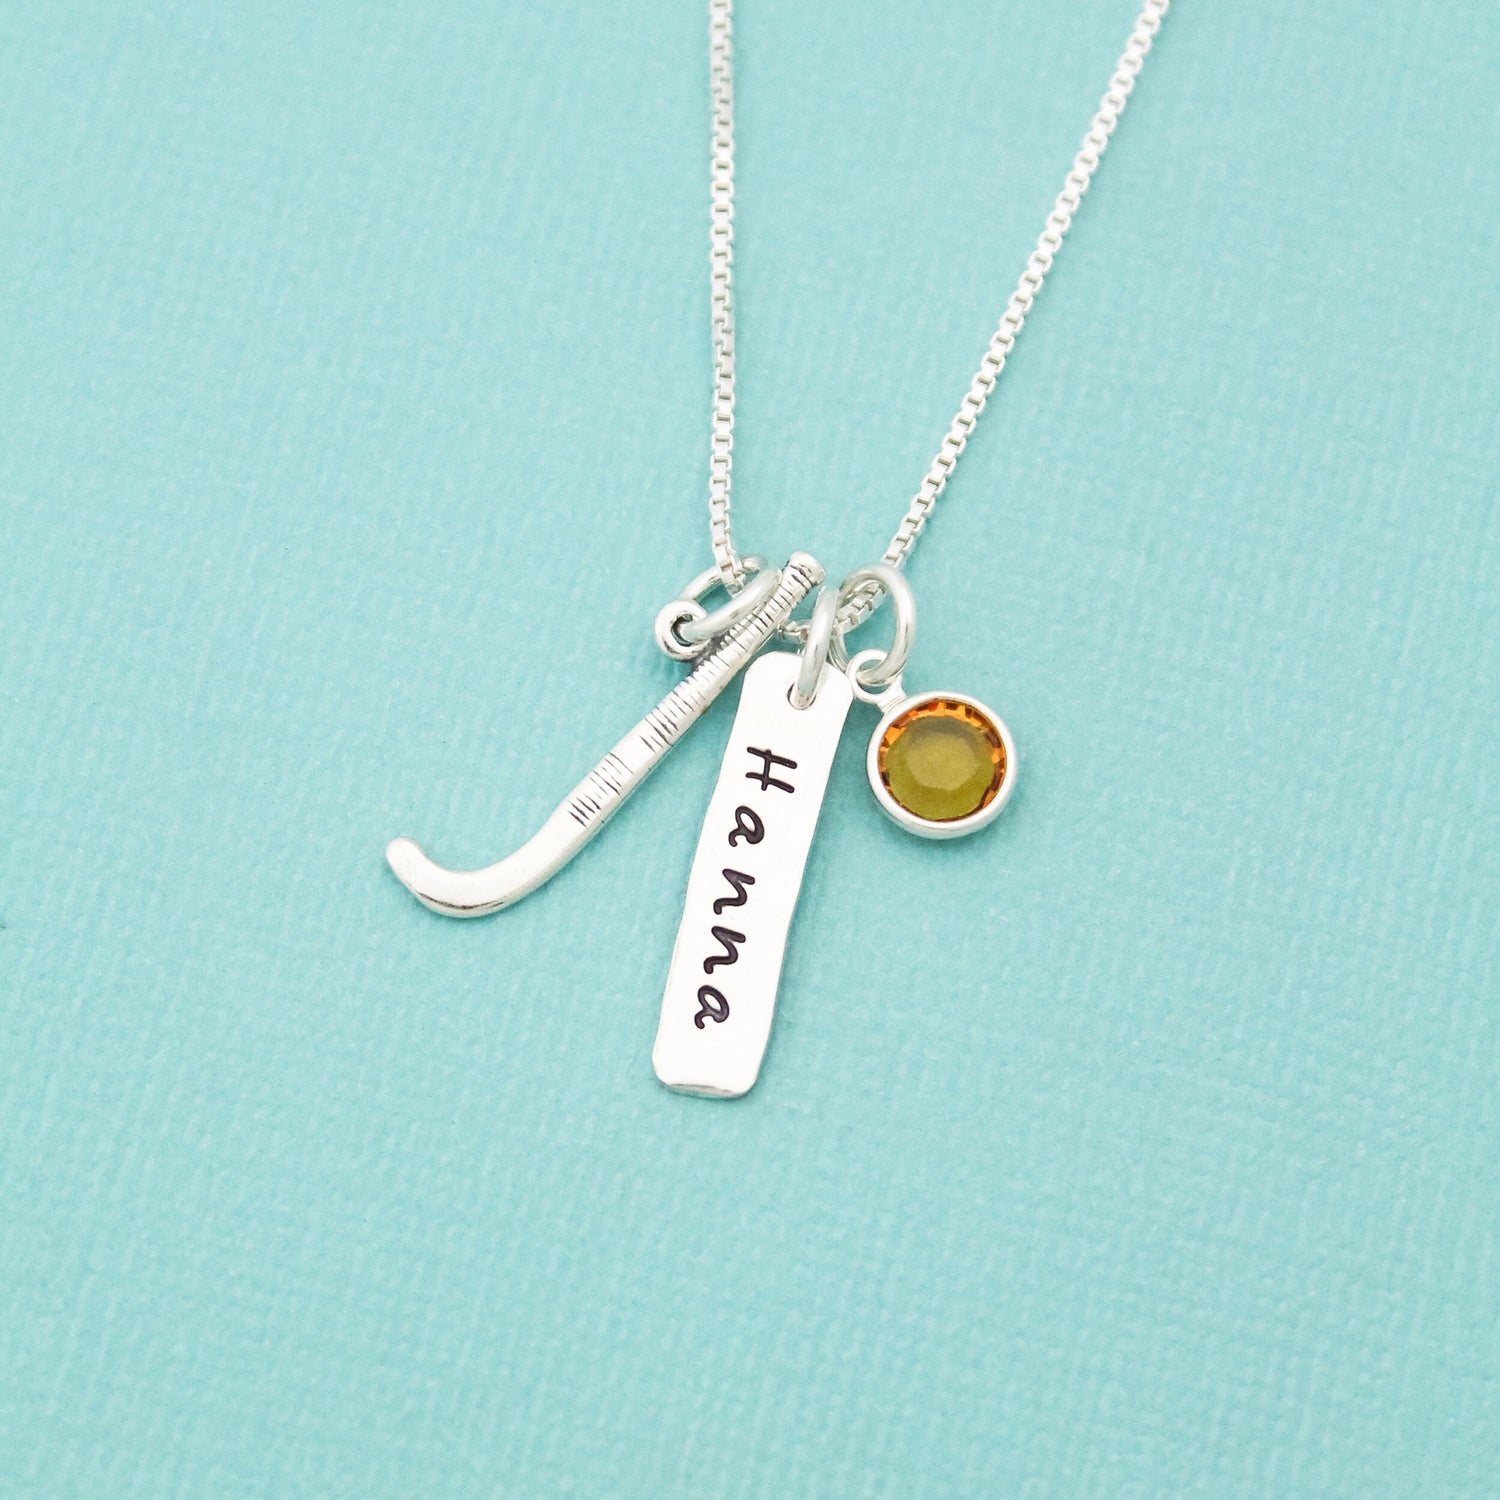 Personalized Field Hockey Necklace, Custom Sport Jewelry, Choose Your Sport Necklace, Field Hockey Team Gift Necklace, Hand Stamped Necklace